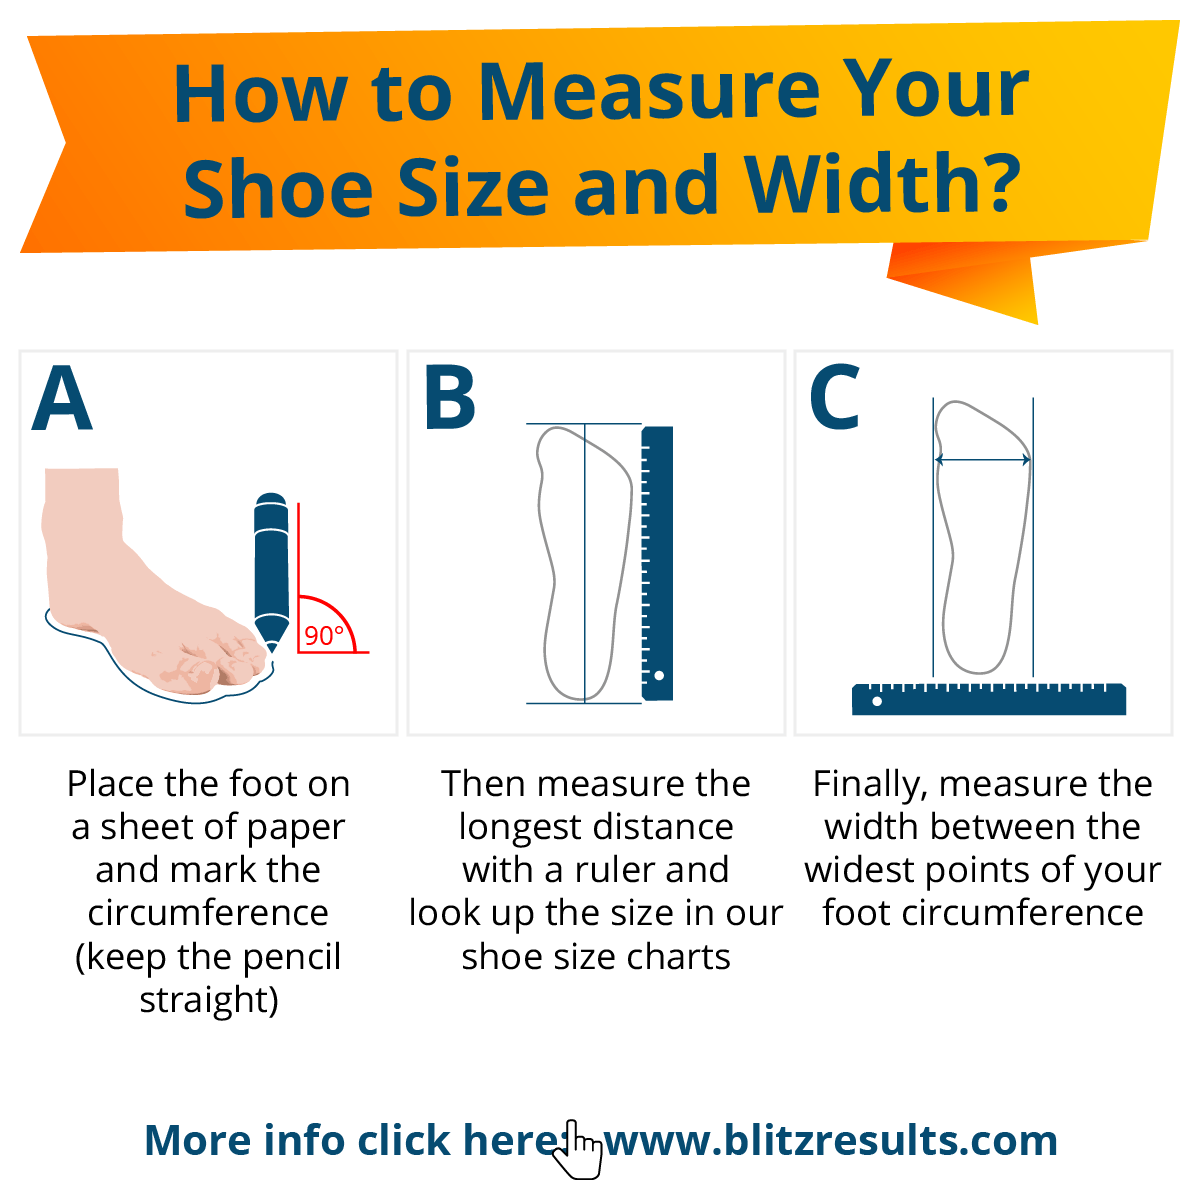 How to Measure your Shoe Size and Width at Home